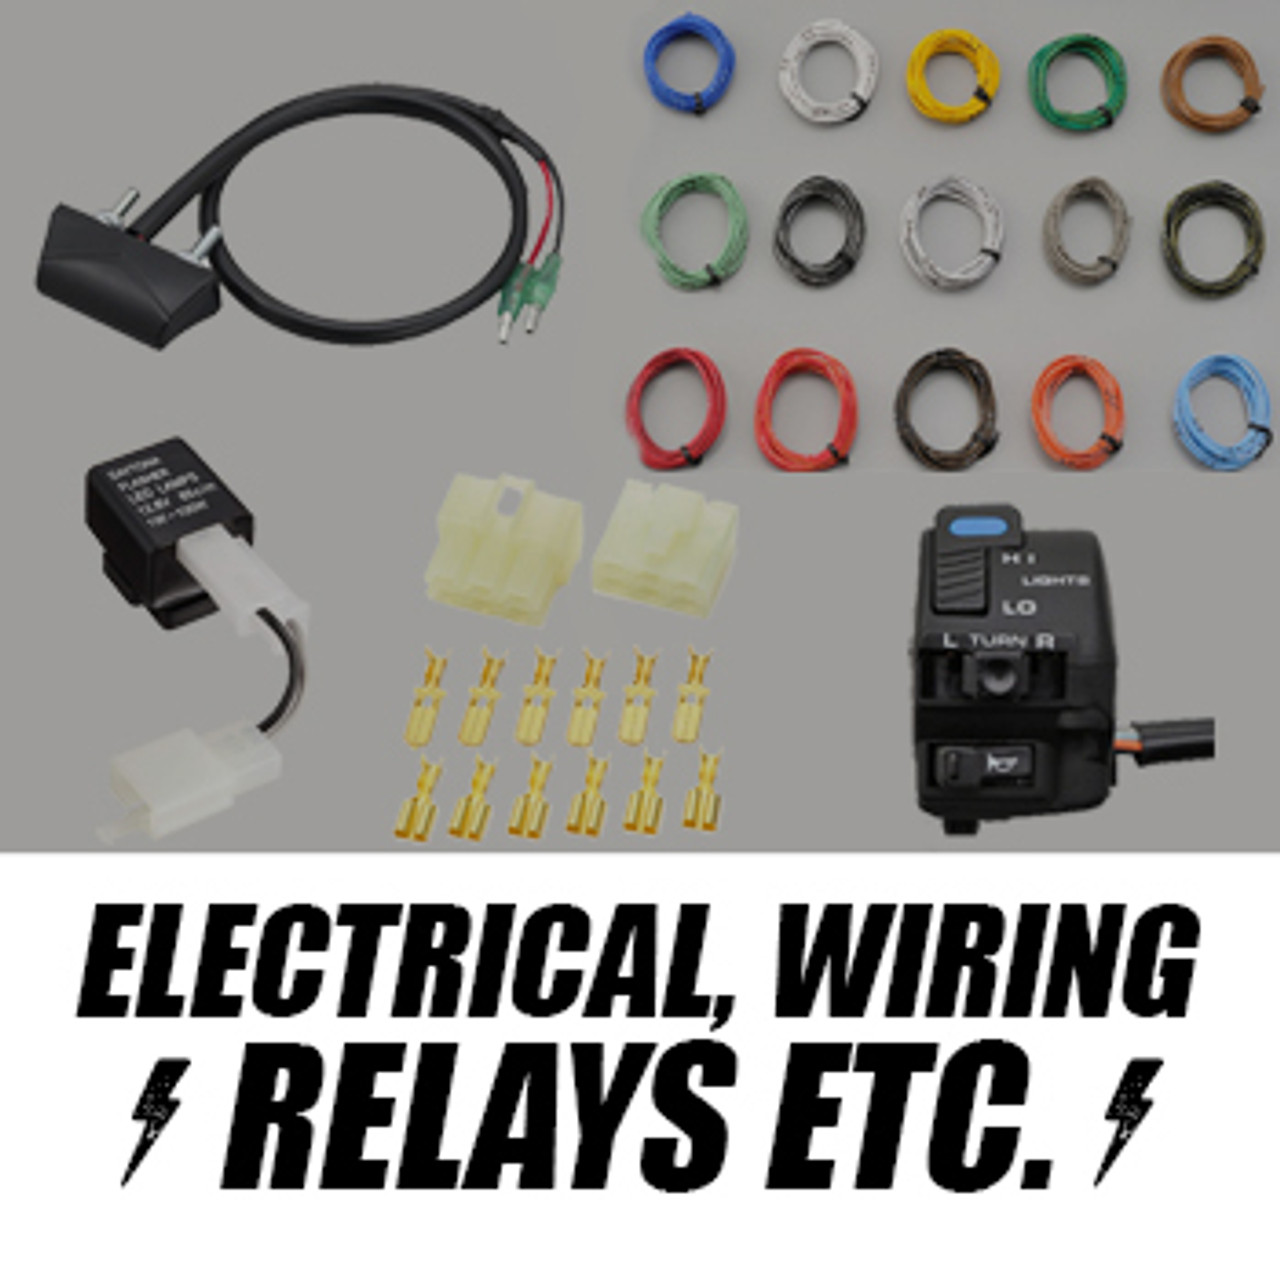 Electrical, Wiring, Relays